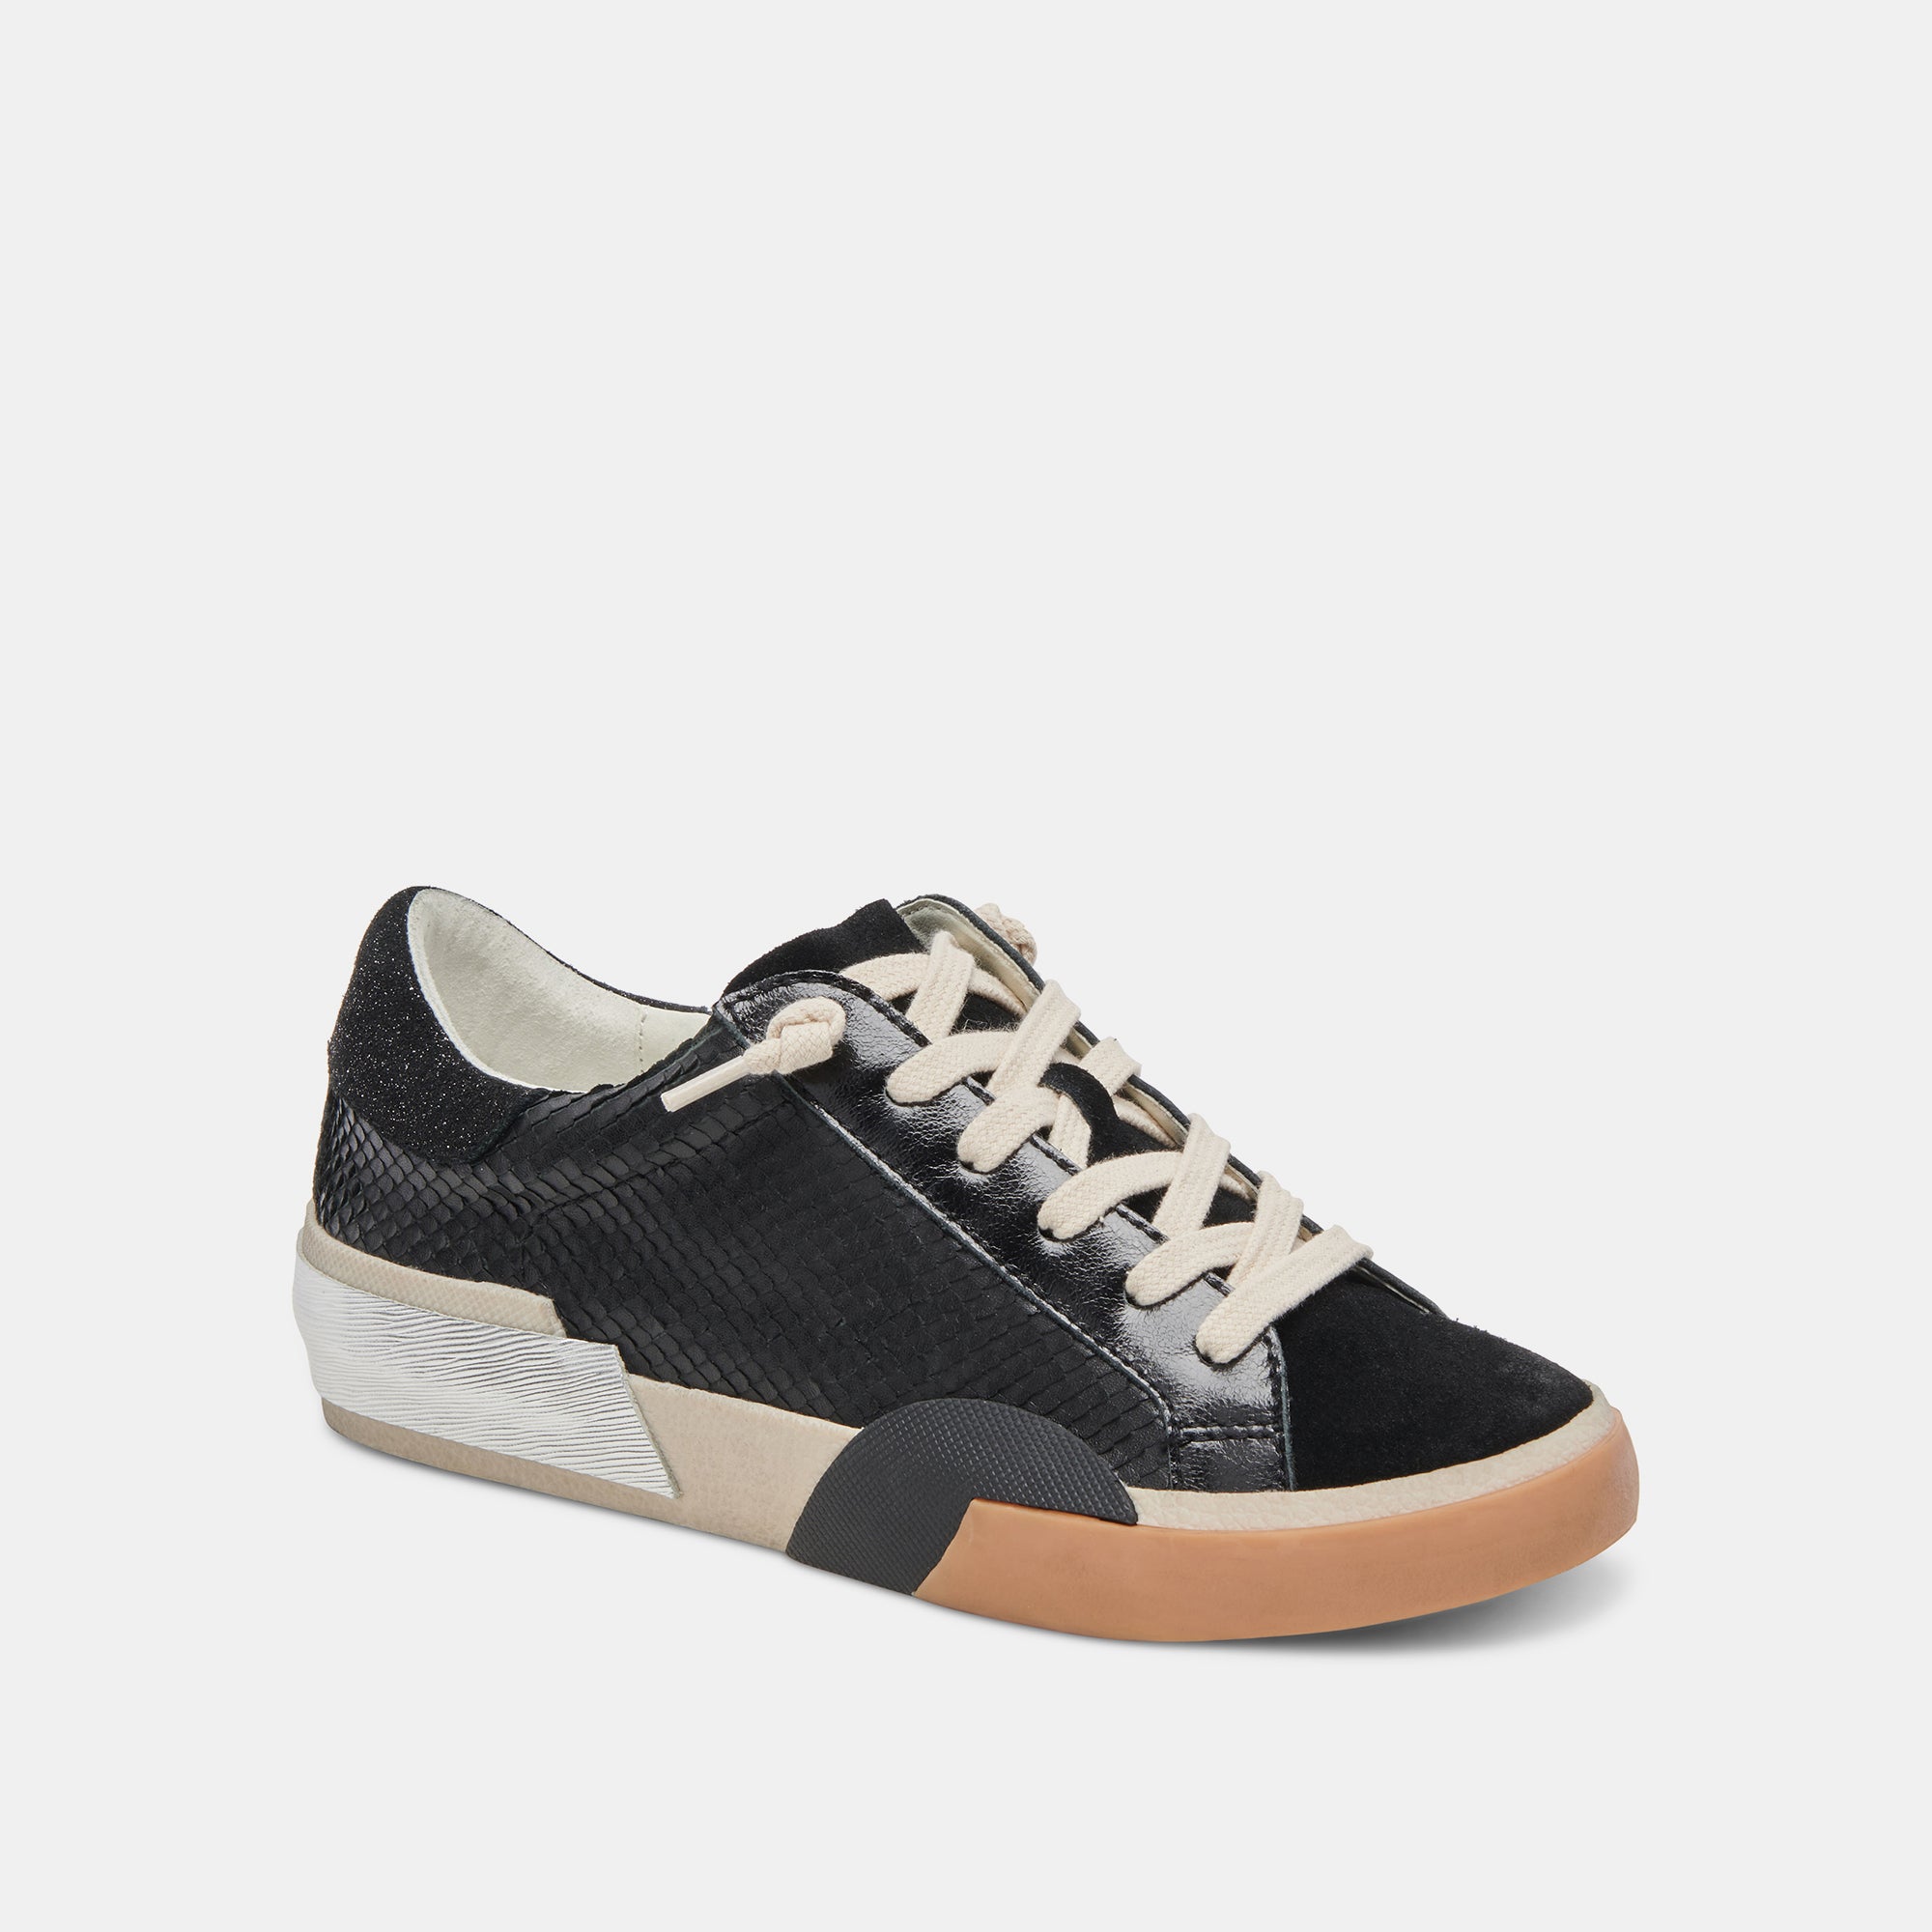 ZINA SNEAKERS ONYX EMBOSSED LEATHER – Dolce Vita